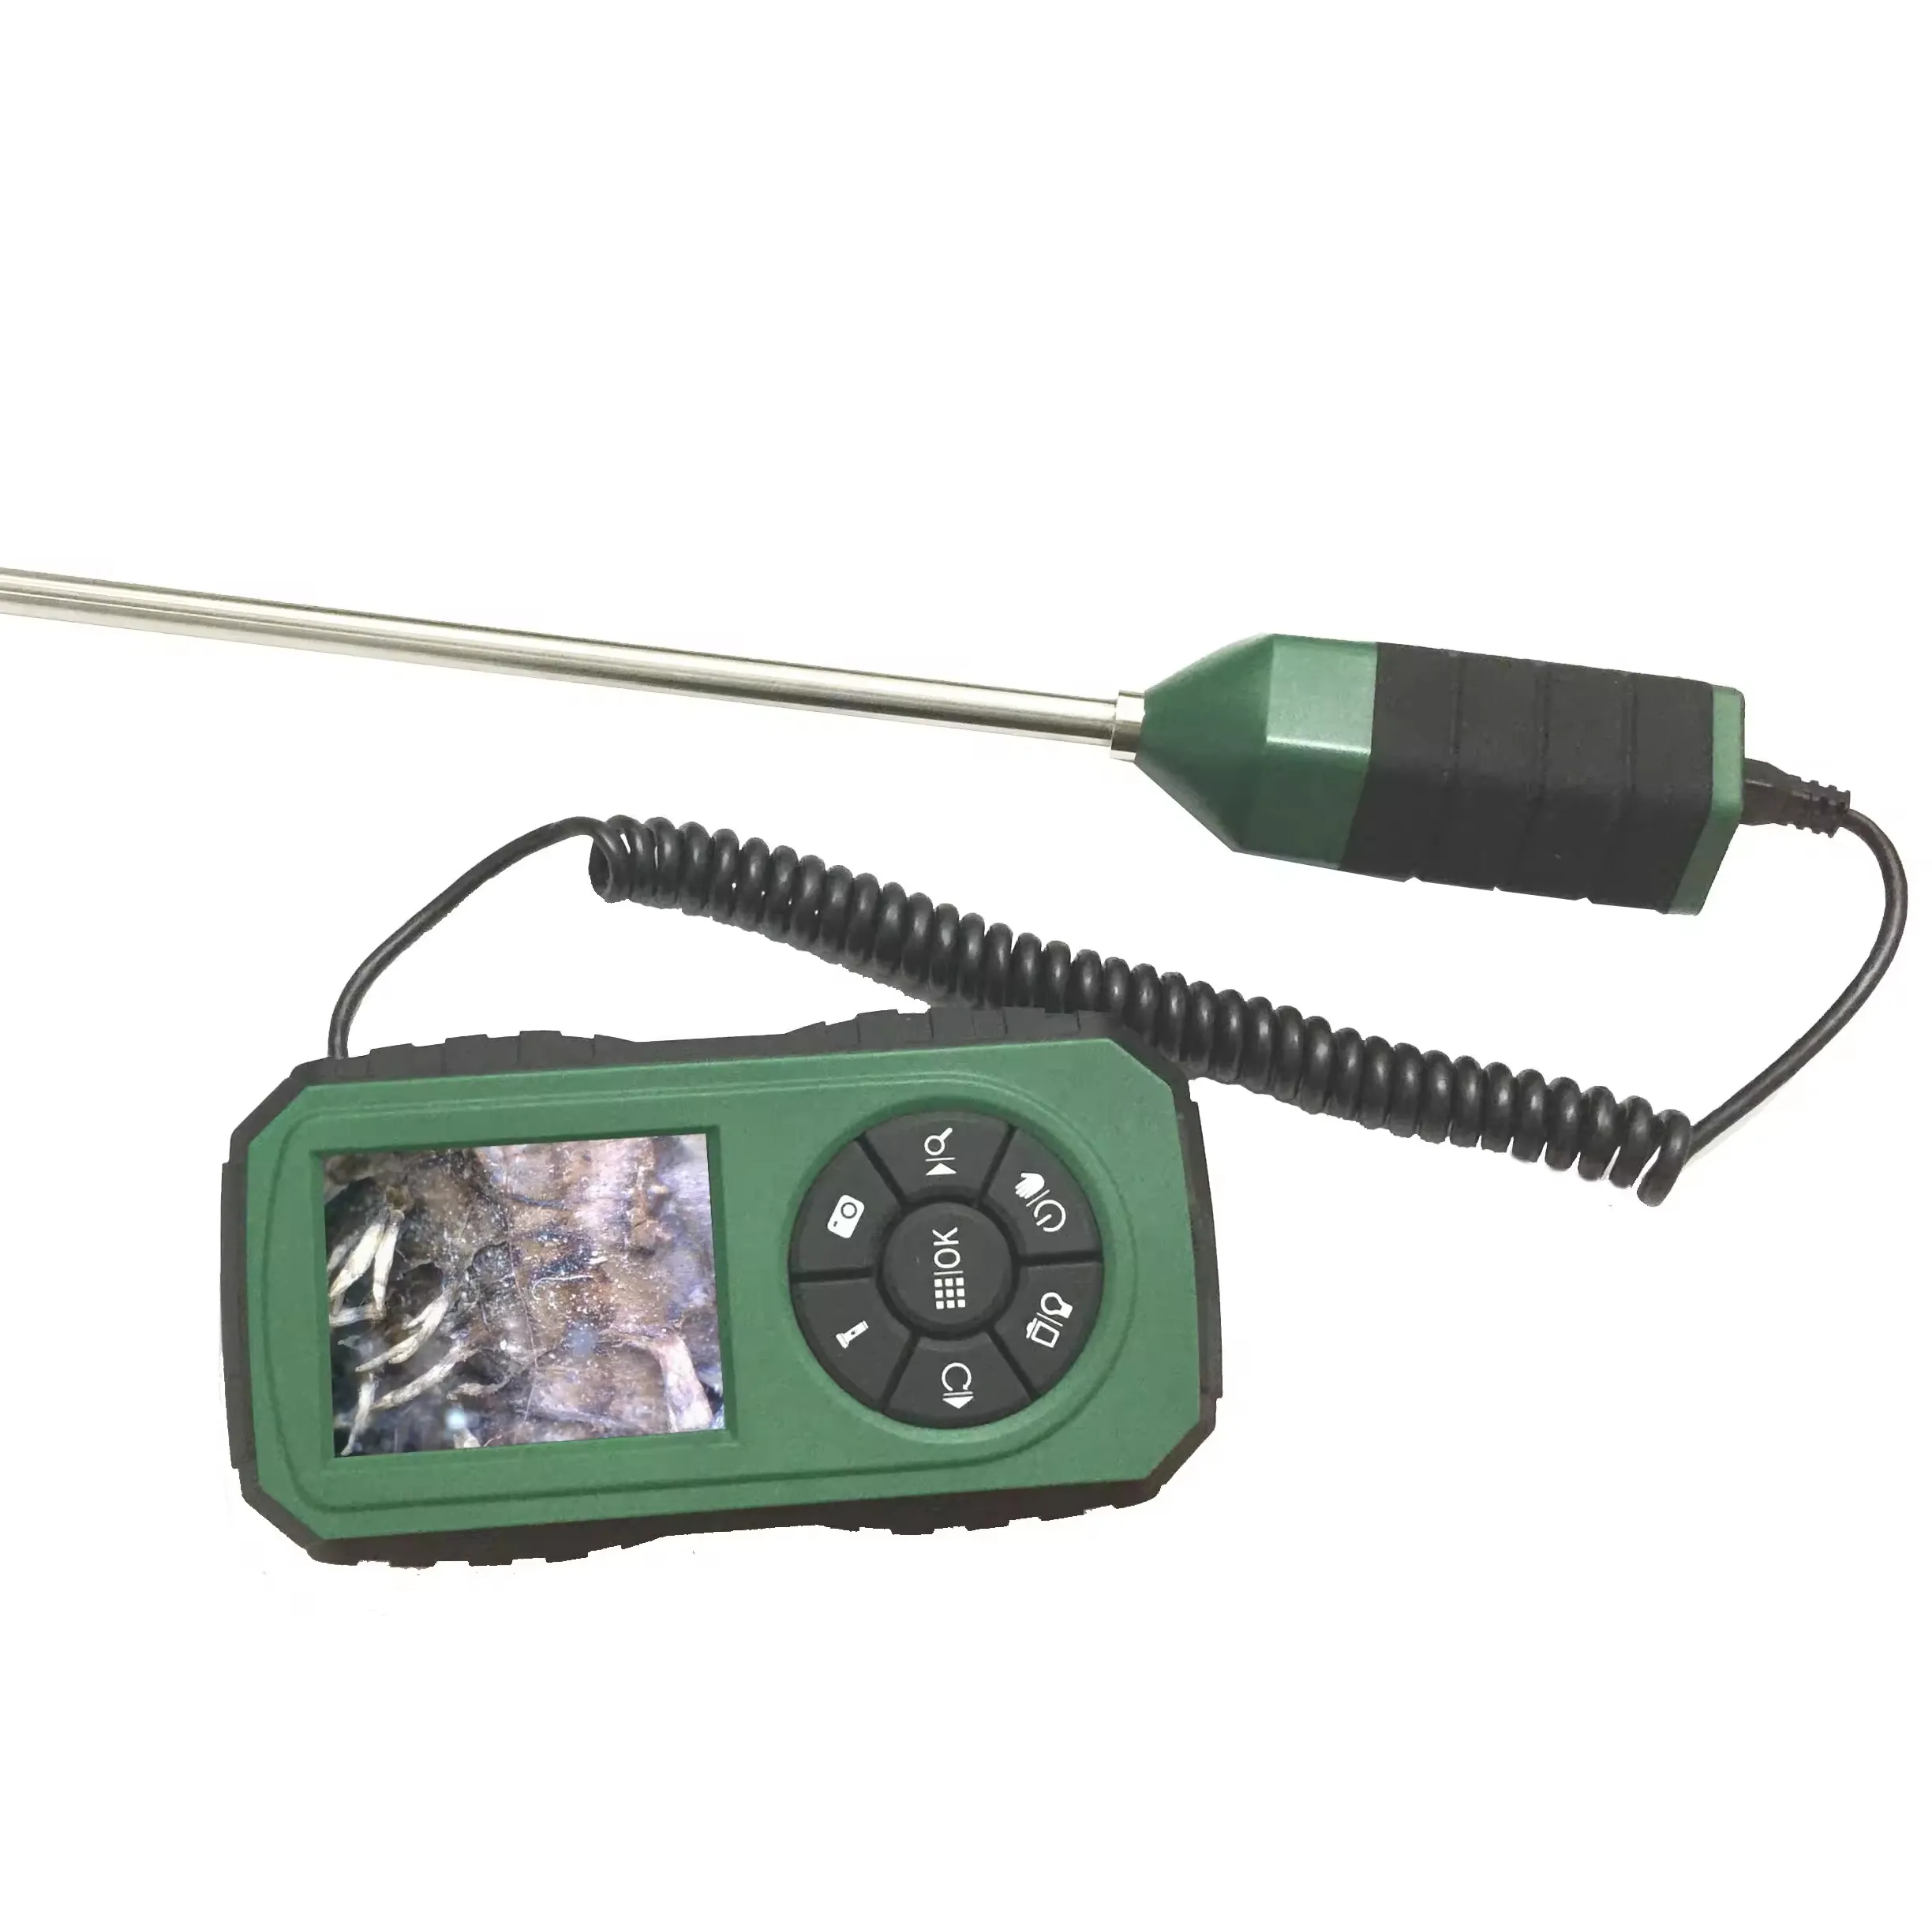 Qyteco Side View Rigid Inspection Camera for Cavity Wall Detection with 150cm Length